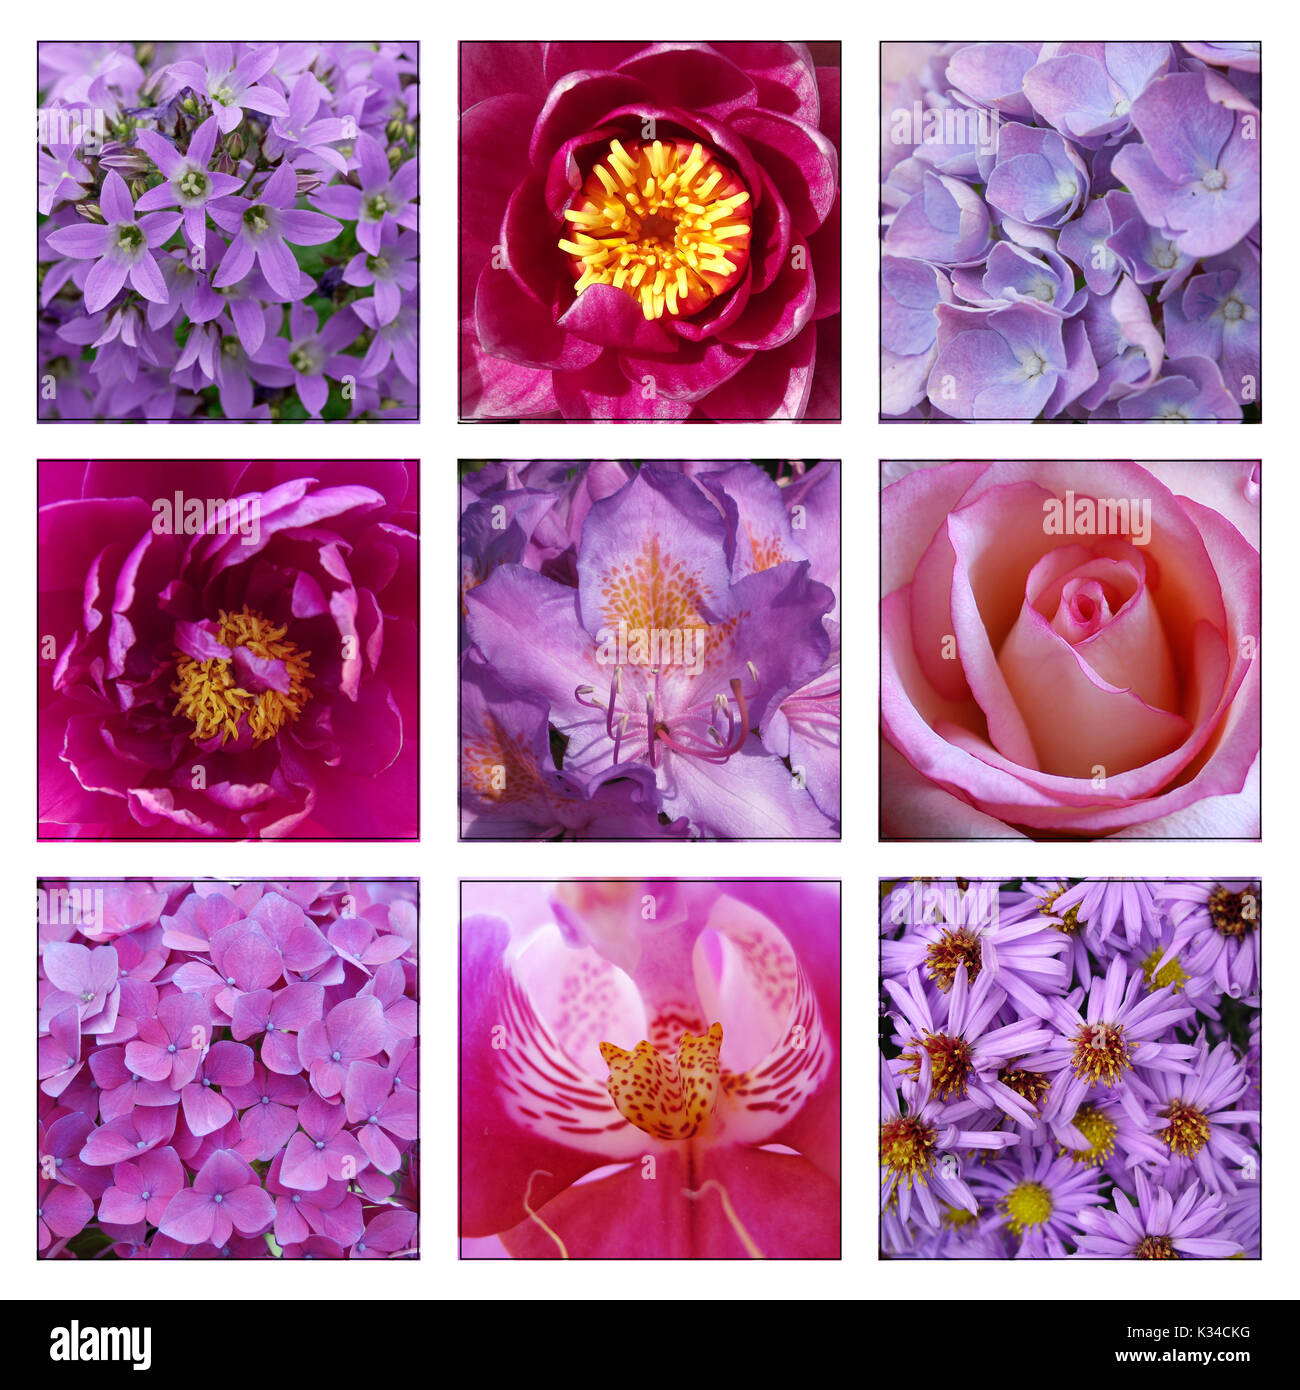 Compilation of pink and purple flowers Stock Photo